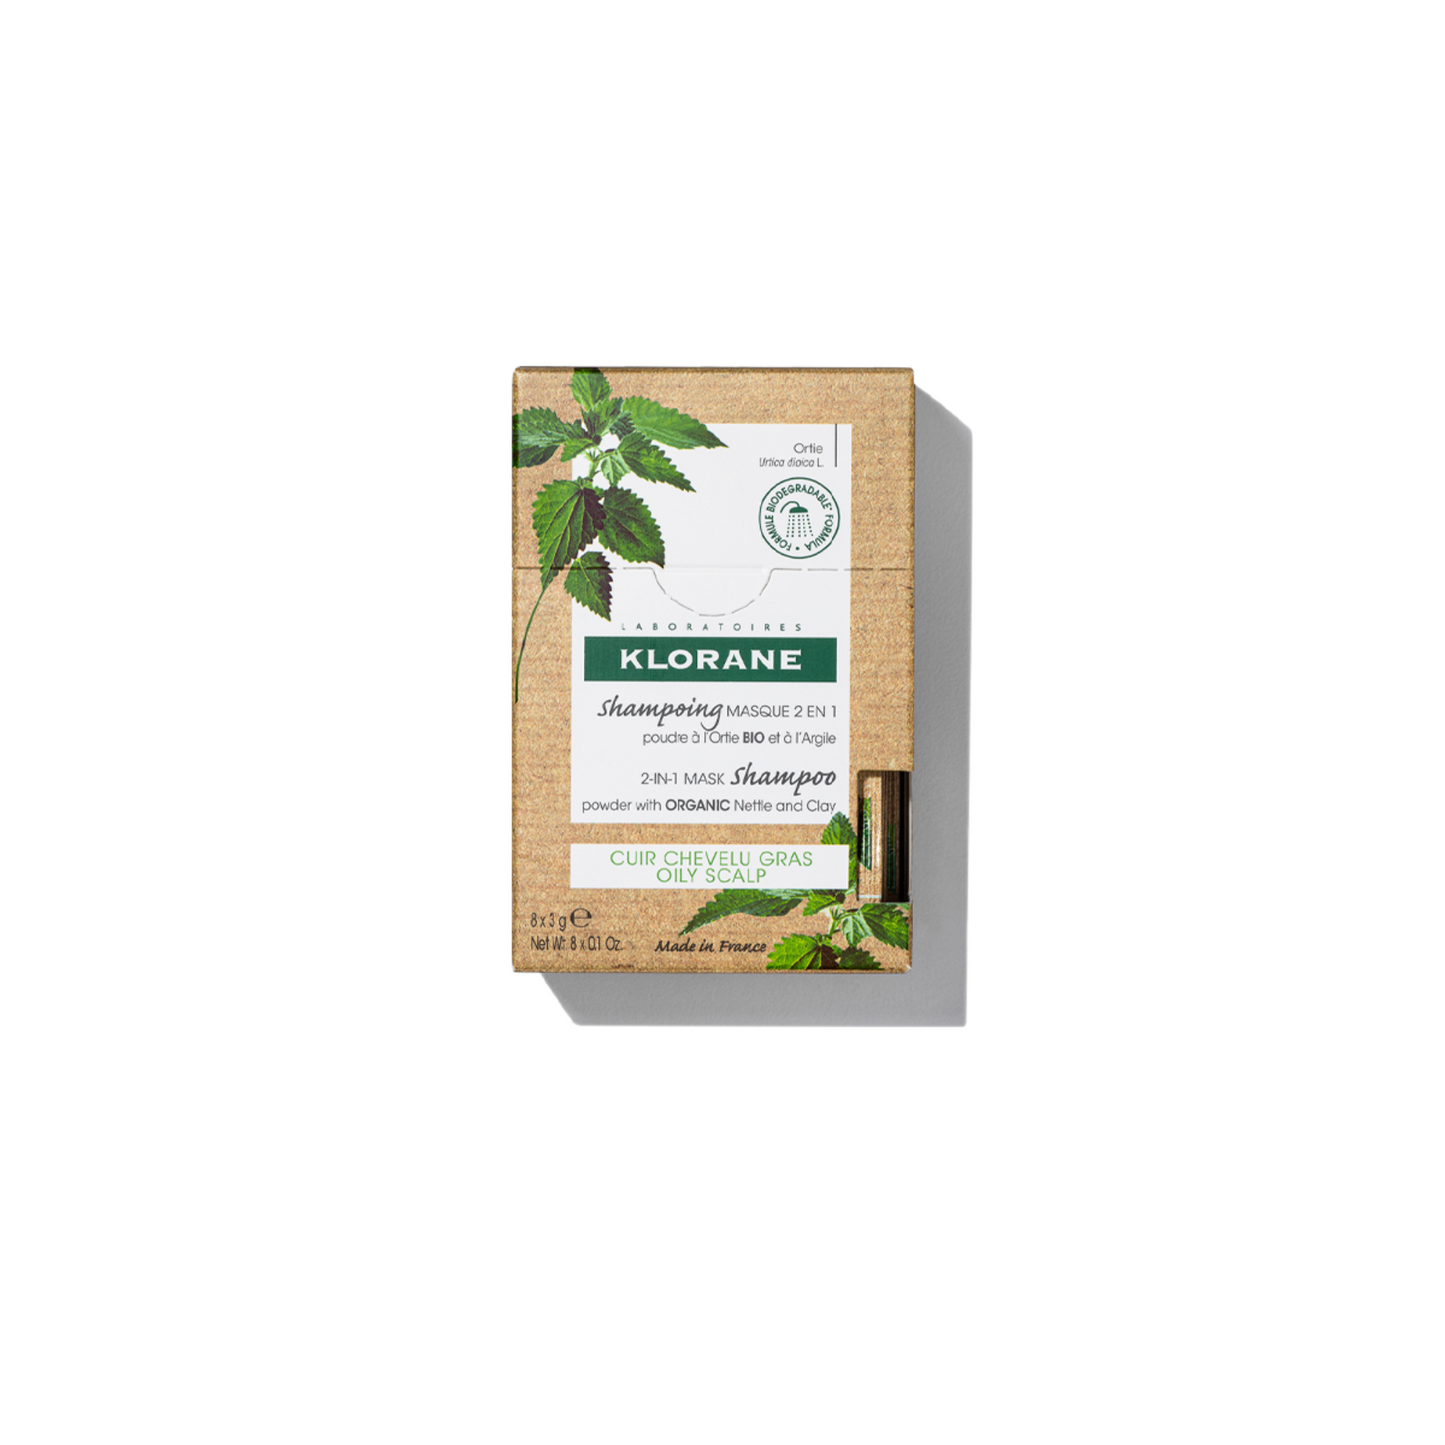 Primary Image of Klorane Nettle 2-in-1 Mask Shampoo (8x3g) 